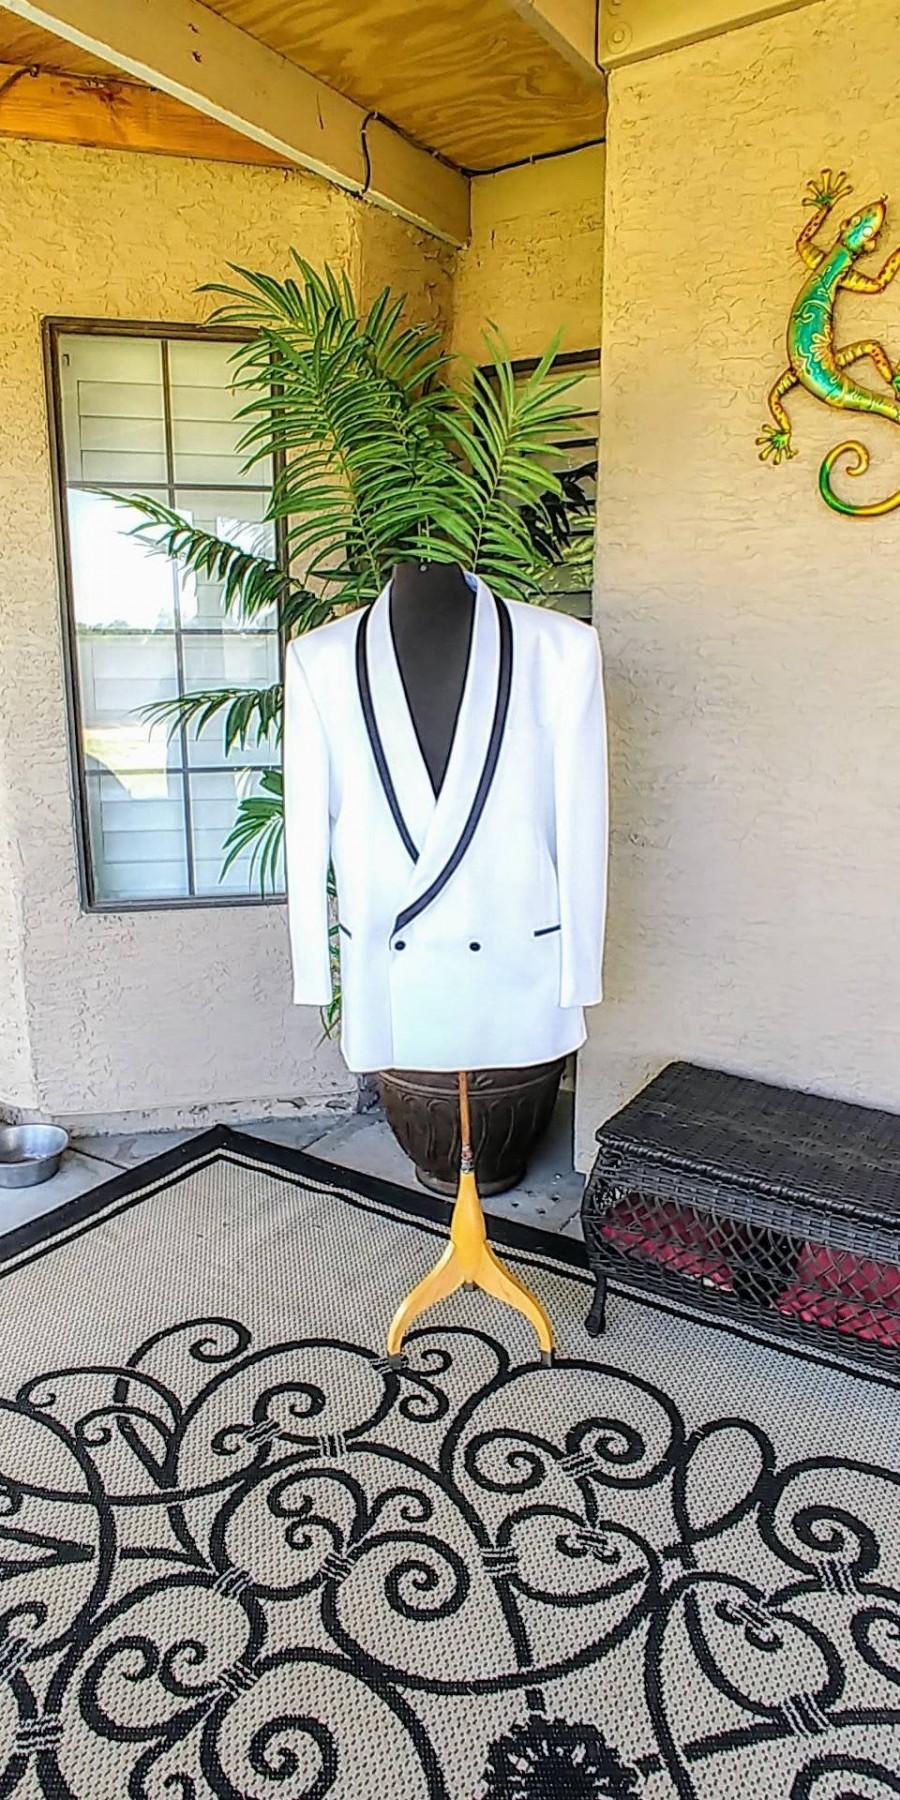 Свадьба - Men's White Vintage Tuxedo Jacket. The Formal Wear Collection by Raffinati Made in U.S.A. Beautiful Jacket White with Black Trim. Size 50 L